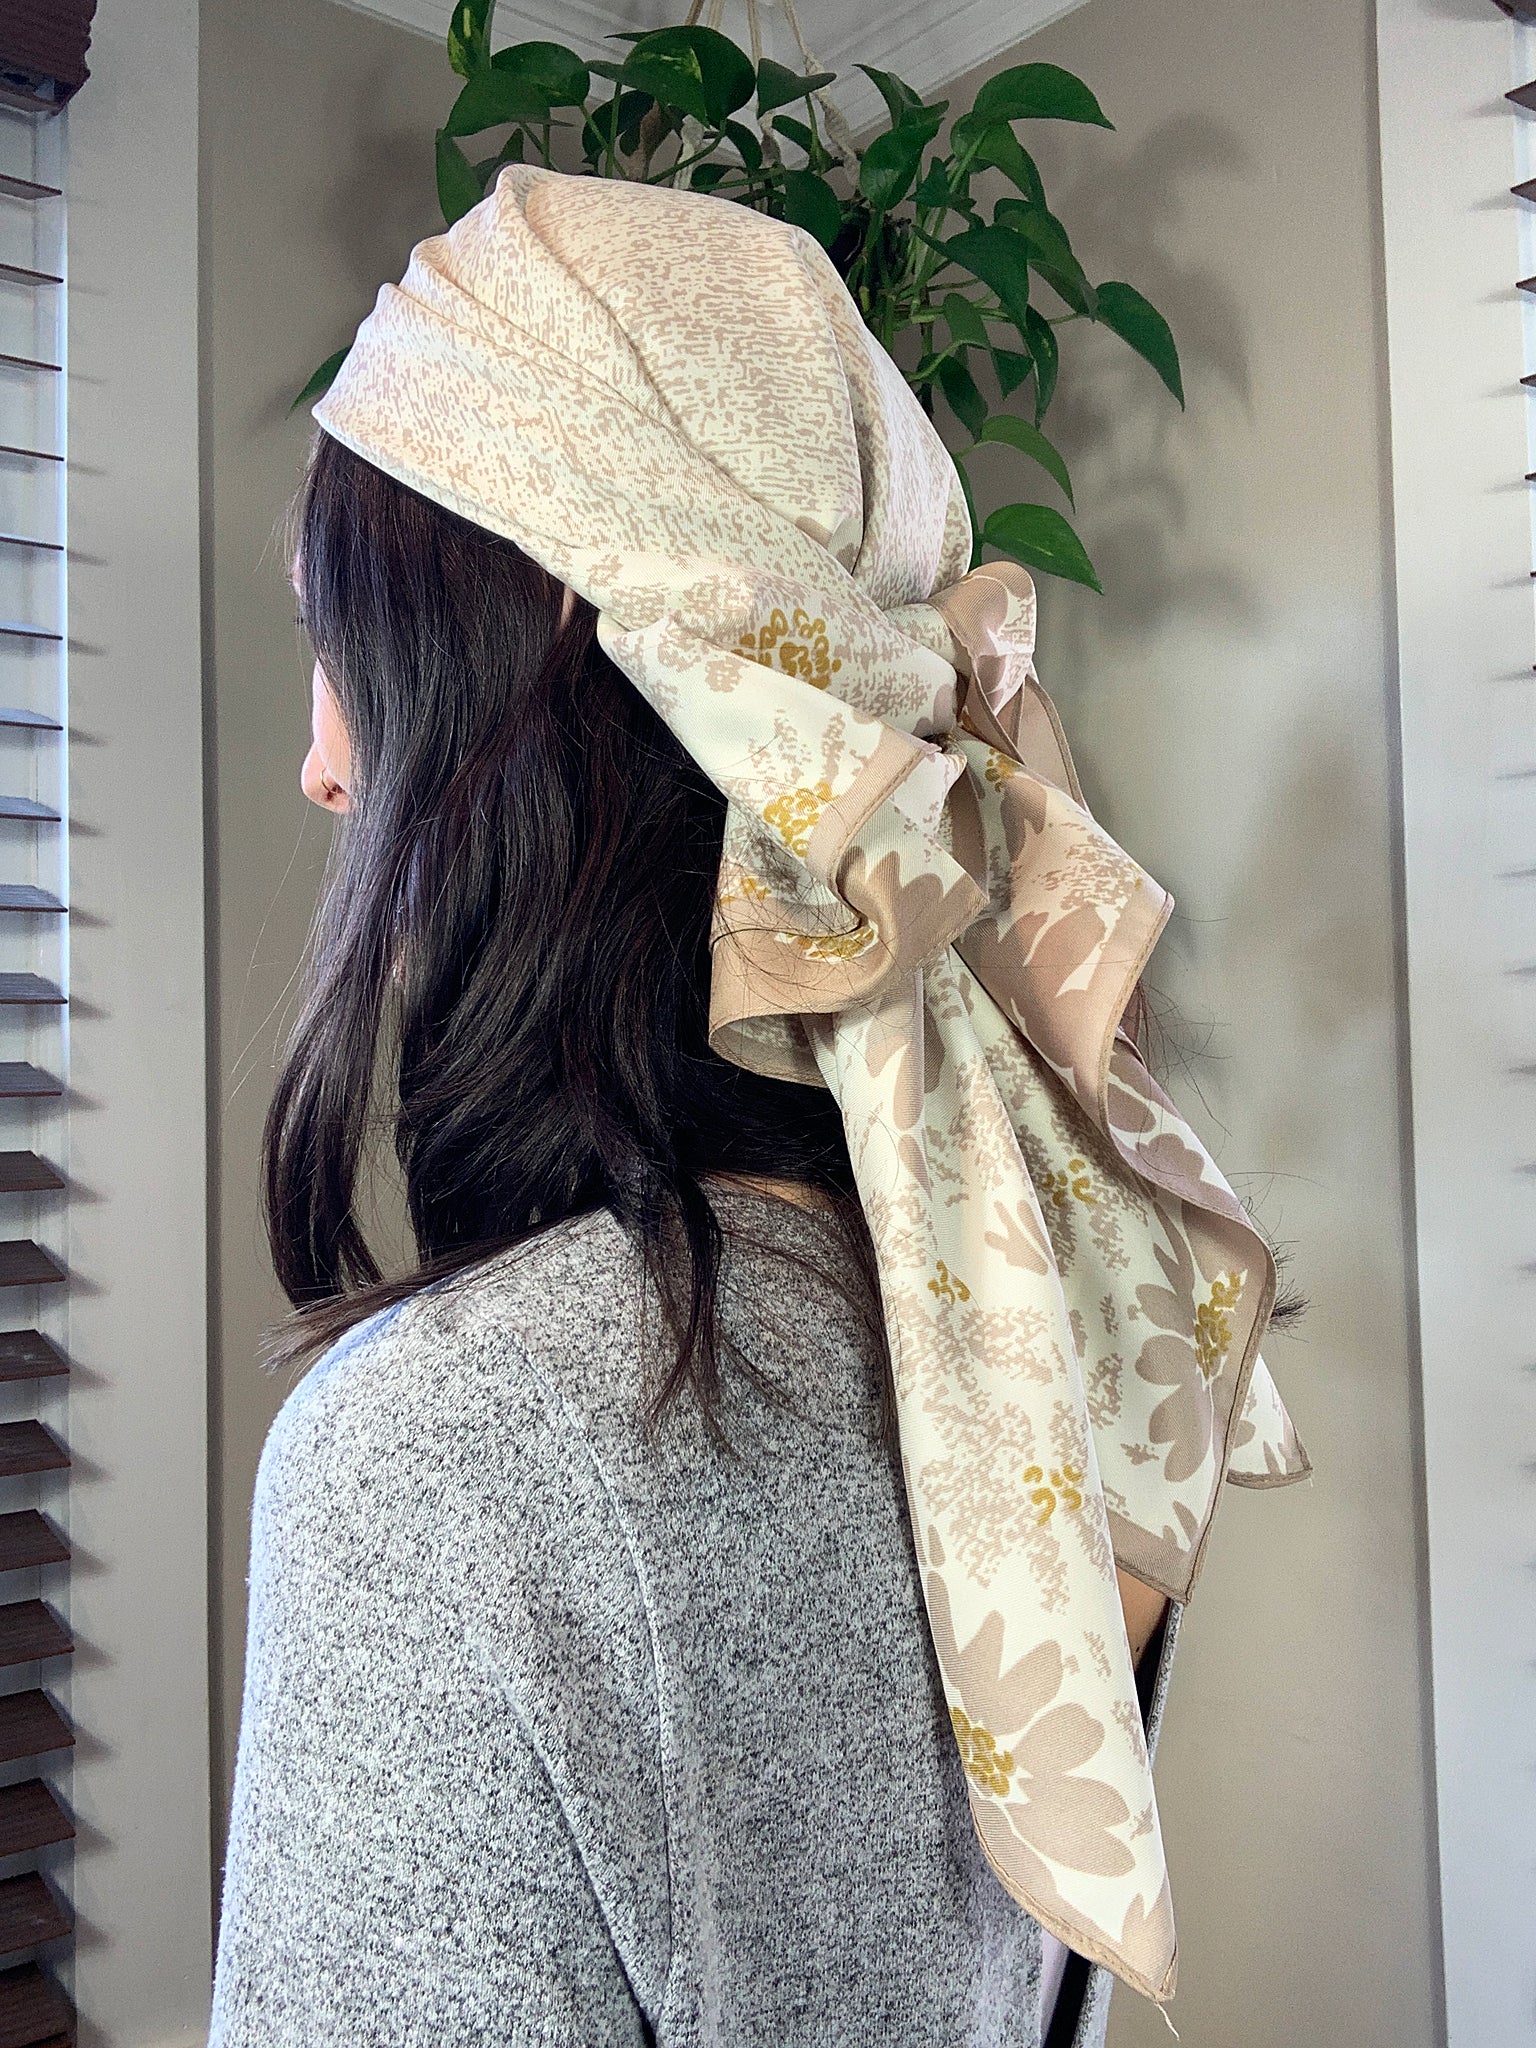 Avenue Zoe Floral Speckled Printed Silky Bandana Scarf in Beige